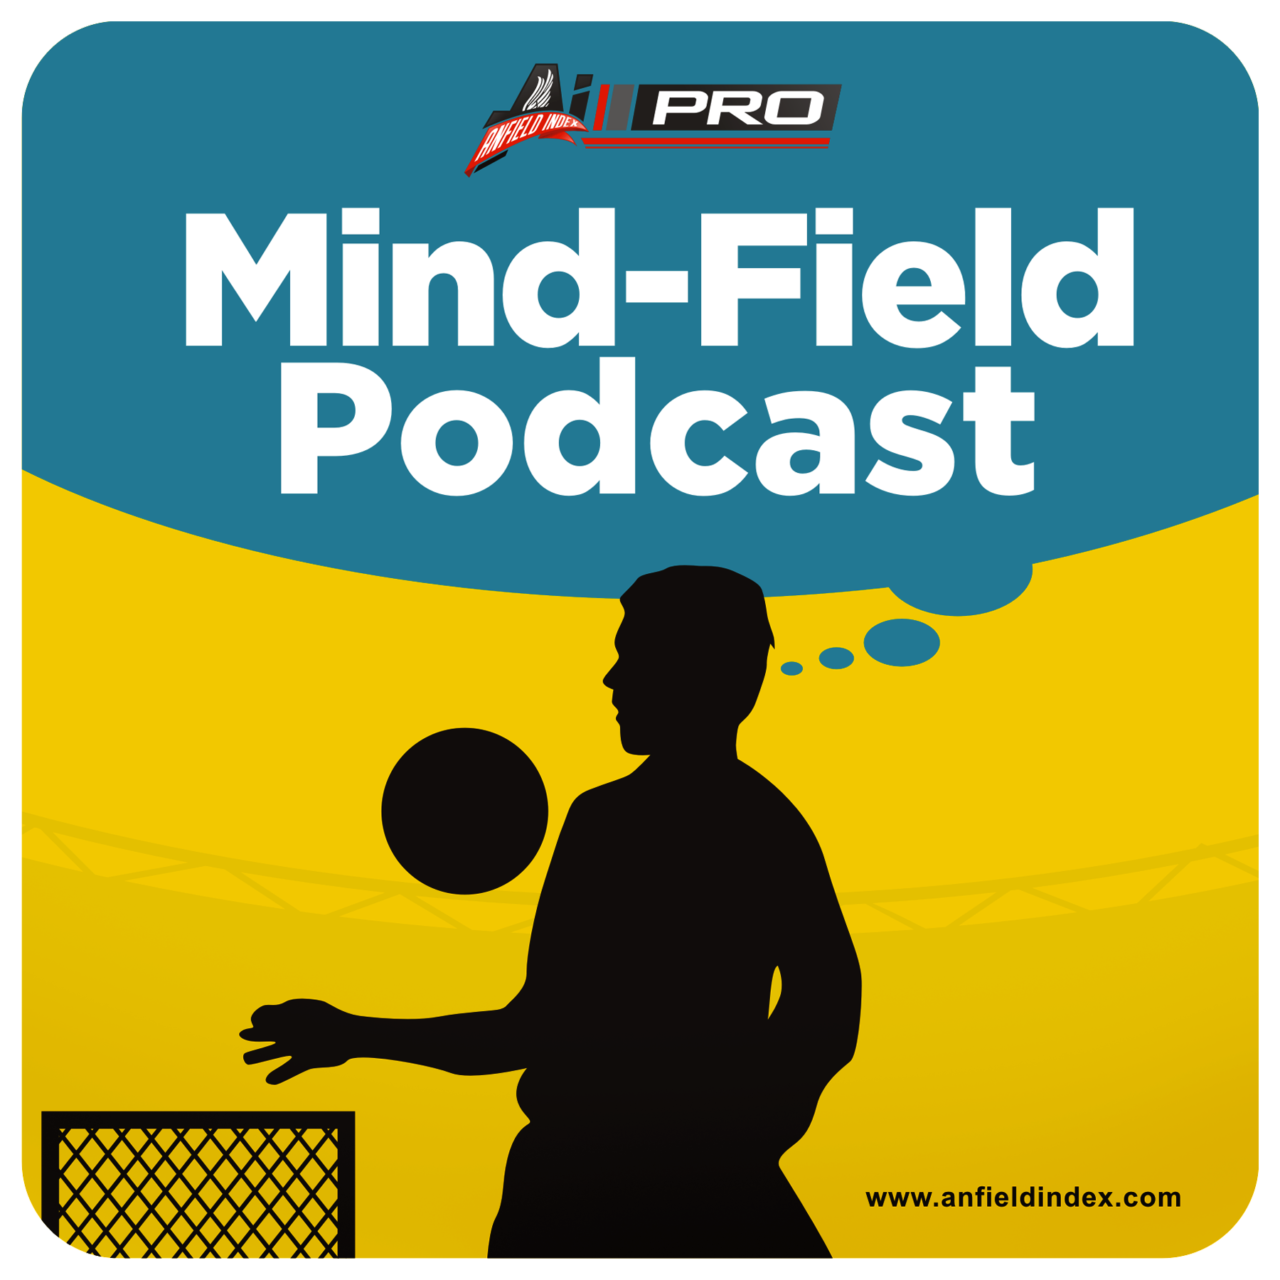 The Mind-Field Podcast: Are The Kids Alright?